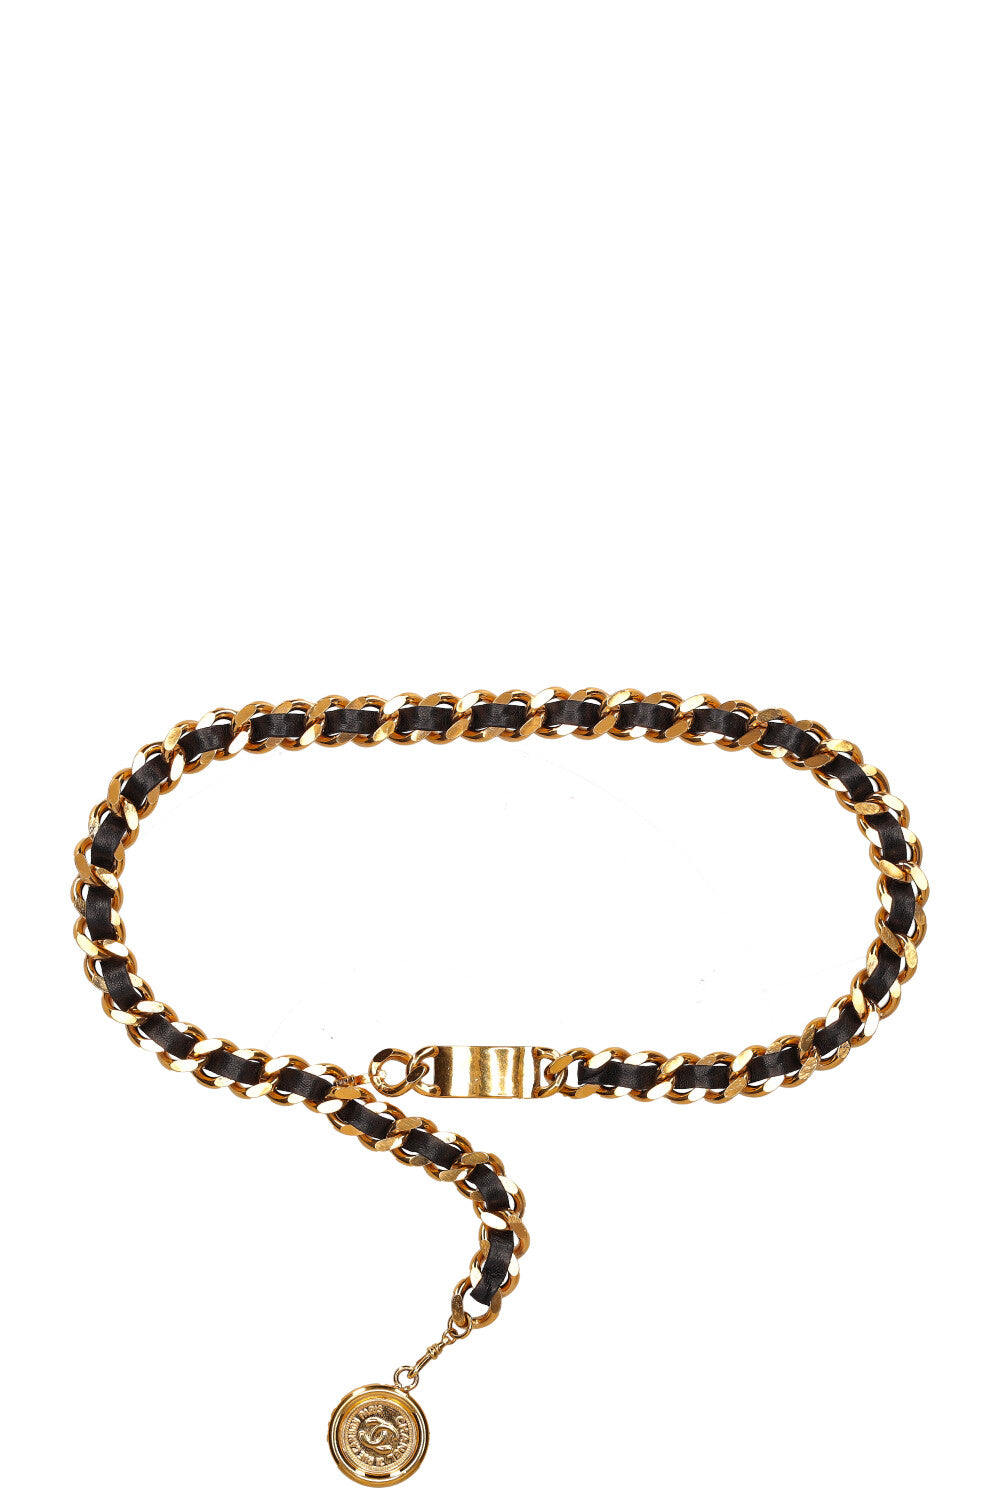 CHANEL Chain Belt with Plaquette and Medaillon